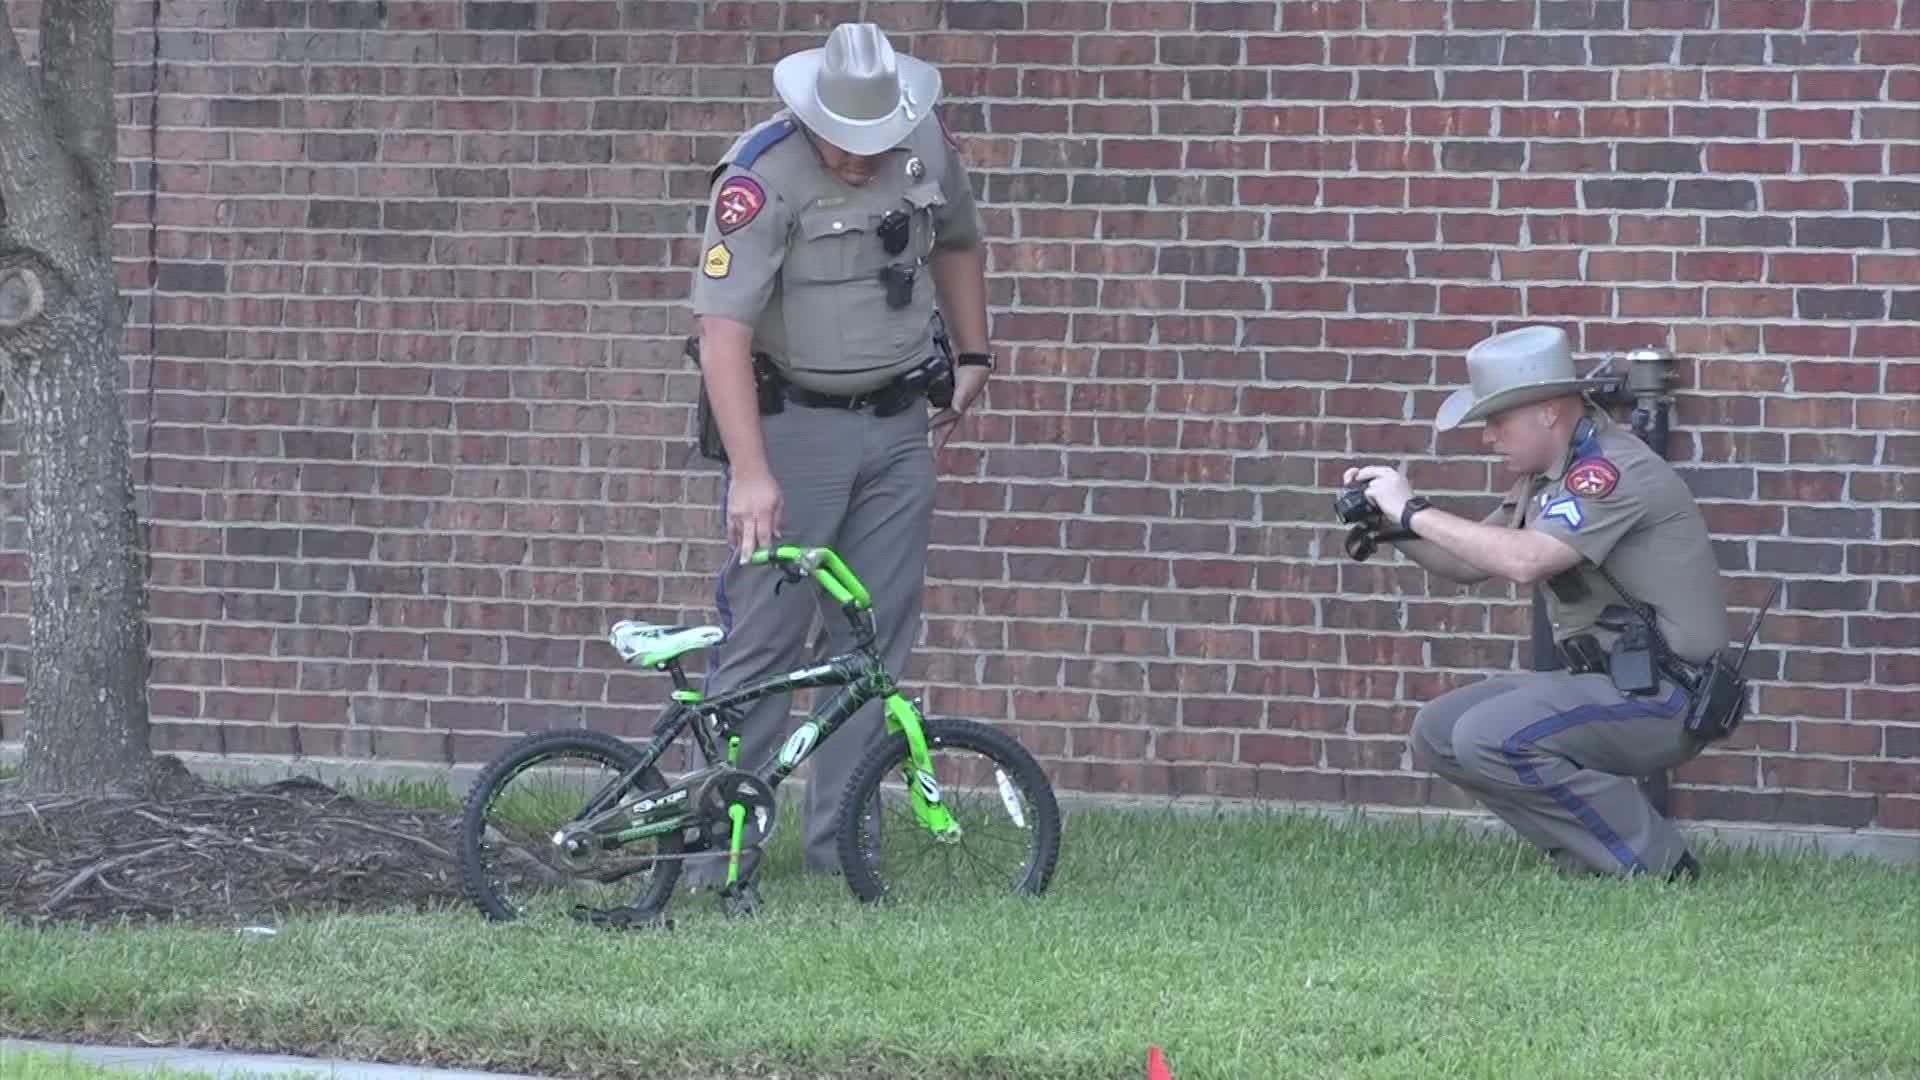 Texas DPS officials said the 8-year-old boy was riding his bike in an area that isn't safe for pedestrians or people riding bikes.